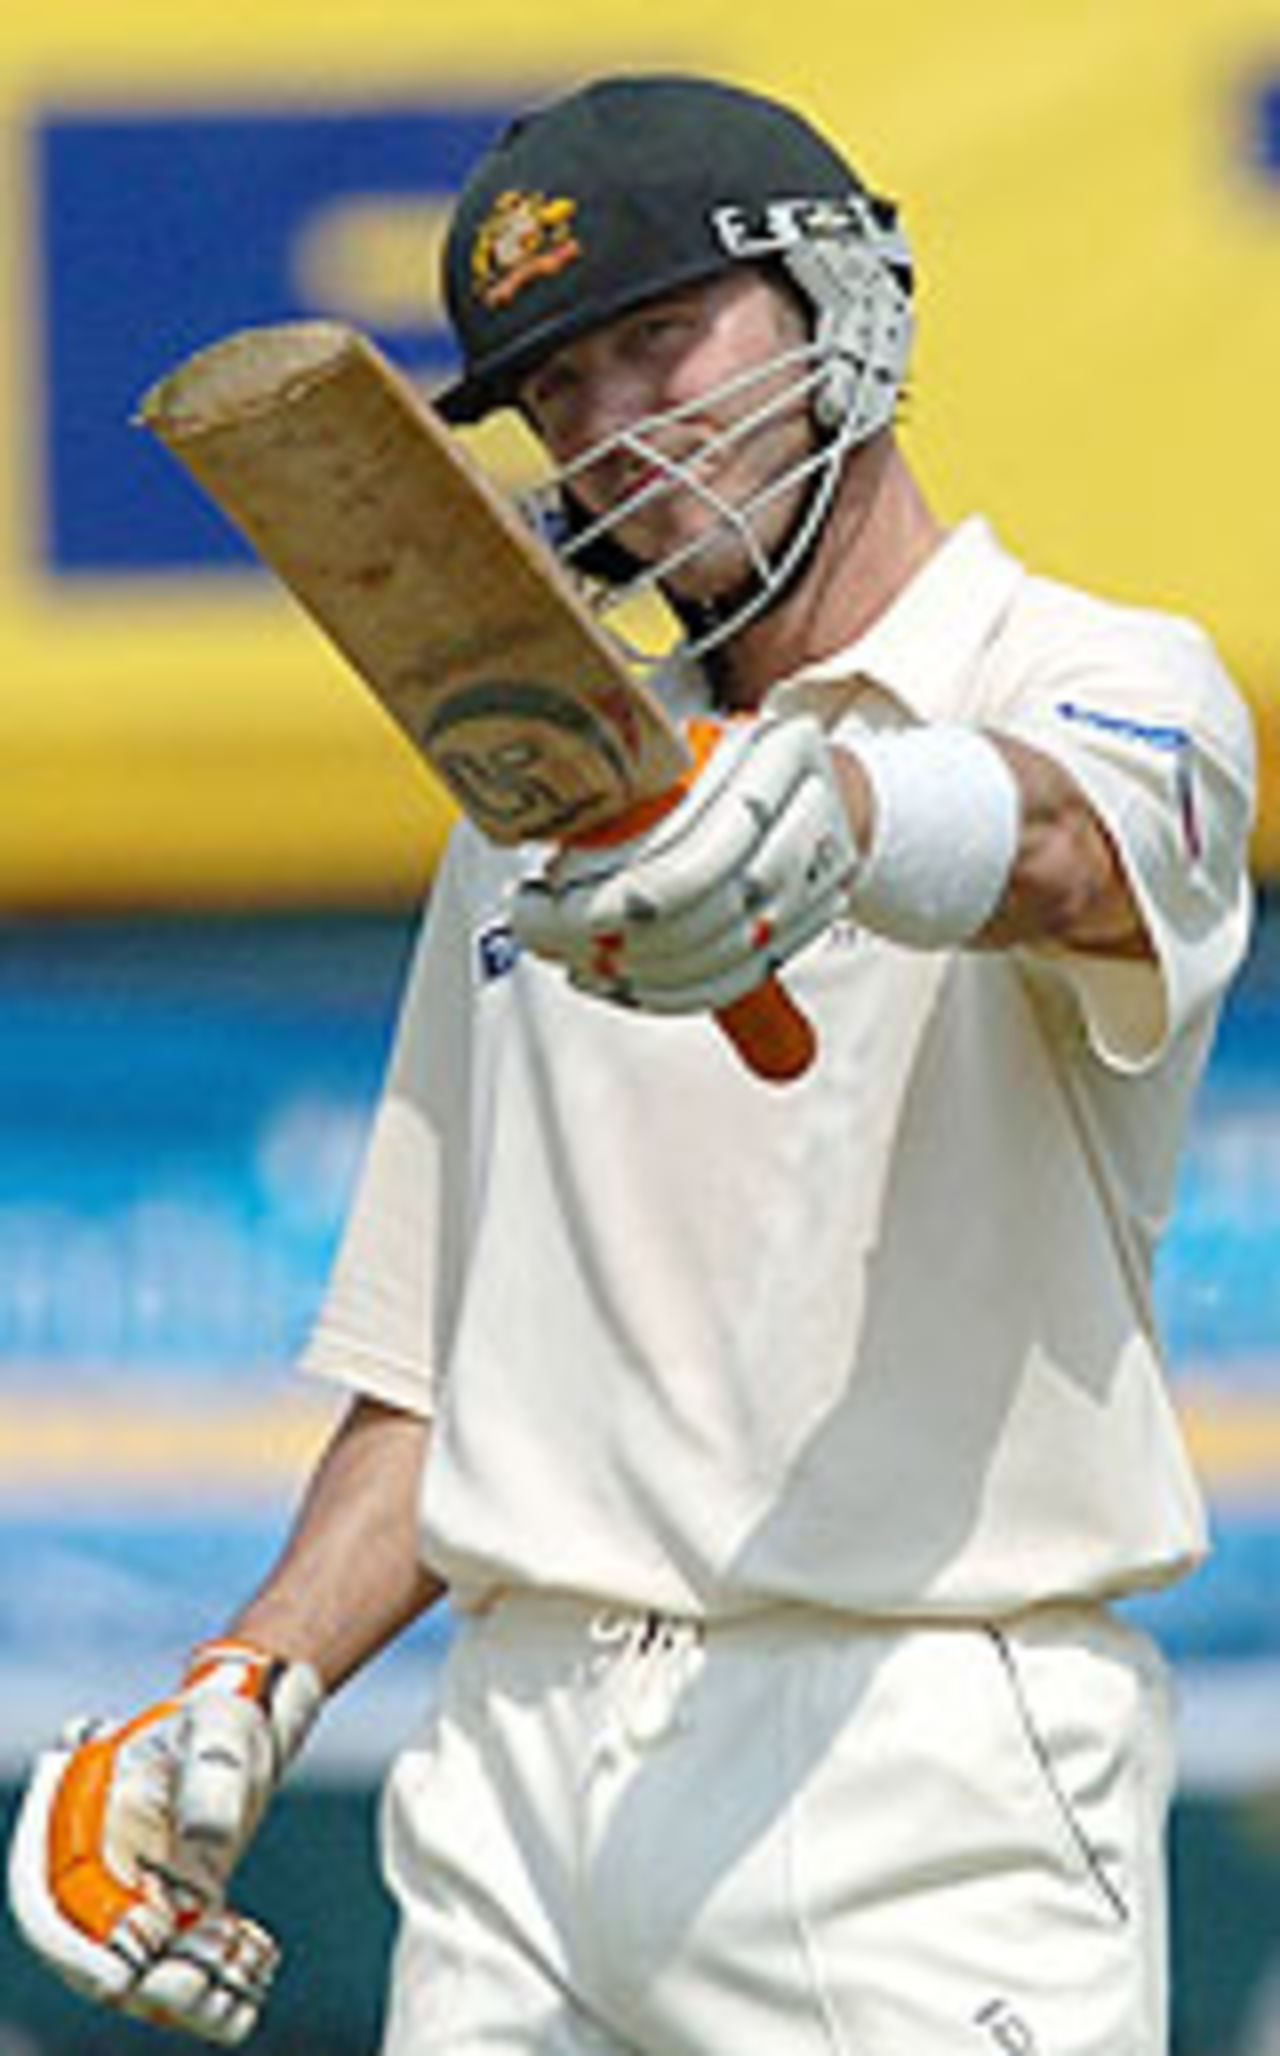 Damien Martyn salutes the crowd after making a half-century, India v Australia, 2nd Test, Nagpur, October 25, 2004